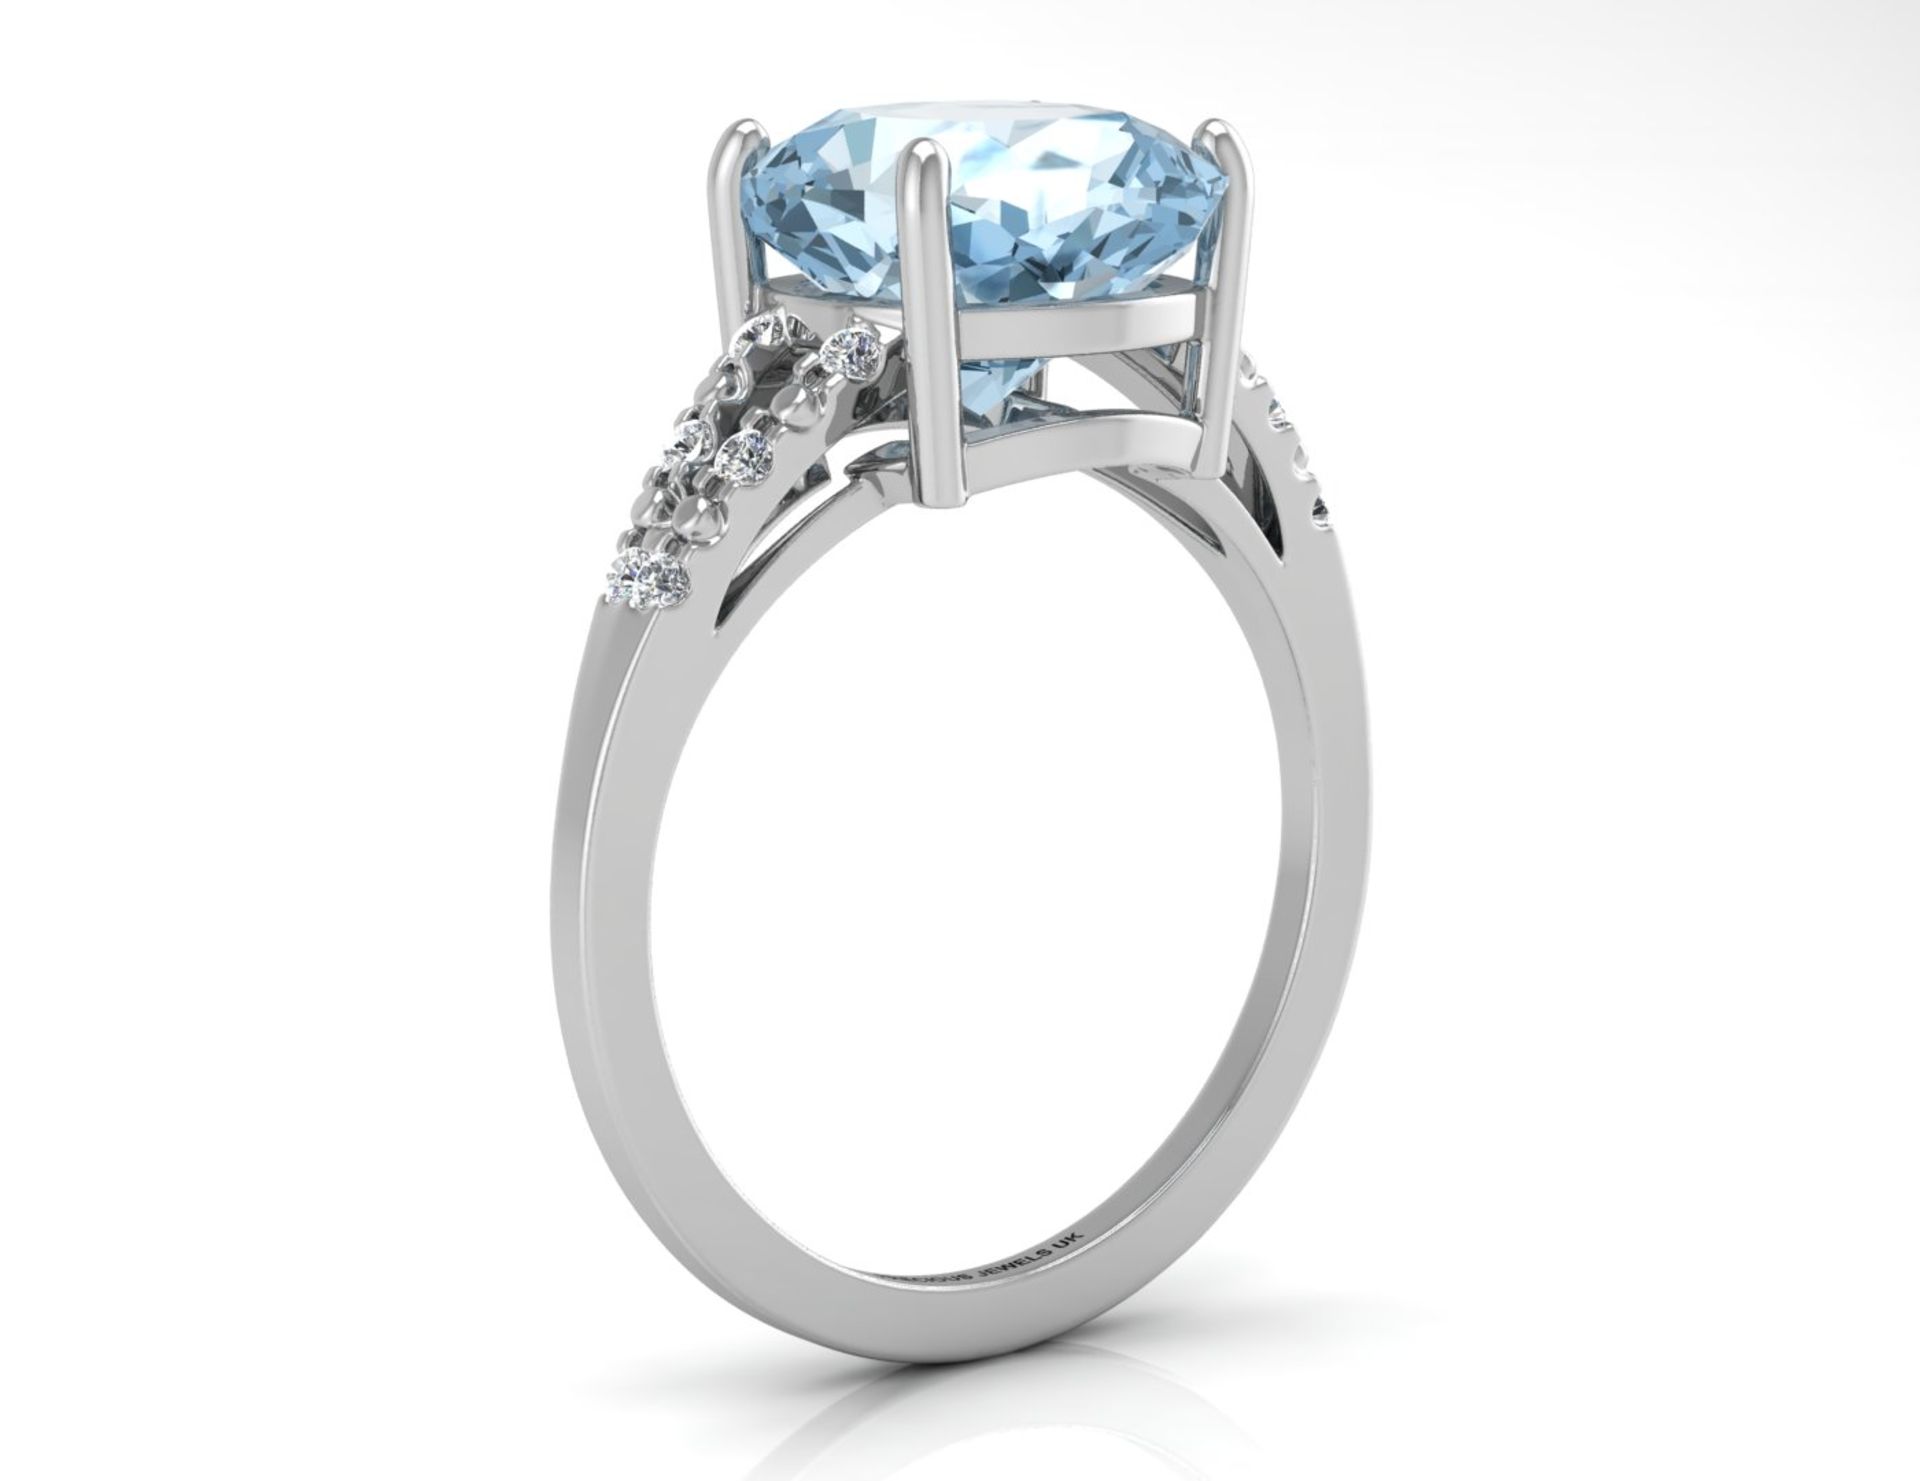 UNUSED - Certified by GIE 9ct White Gold Cushion Cut Blue Topaz With Diamond Set Shoulders Ring 0.06 - Image 2 of 5